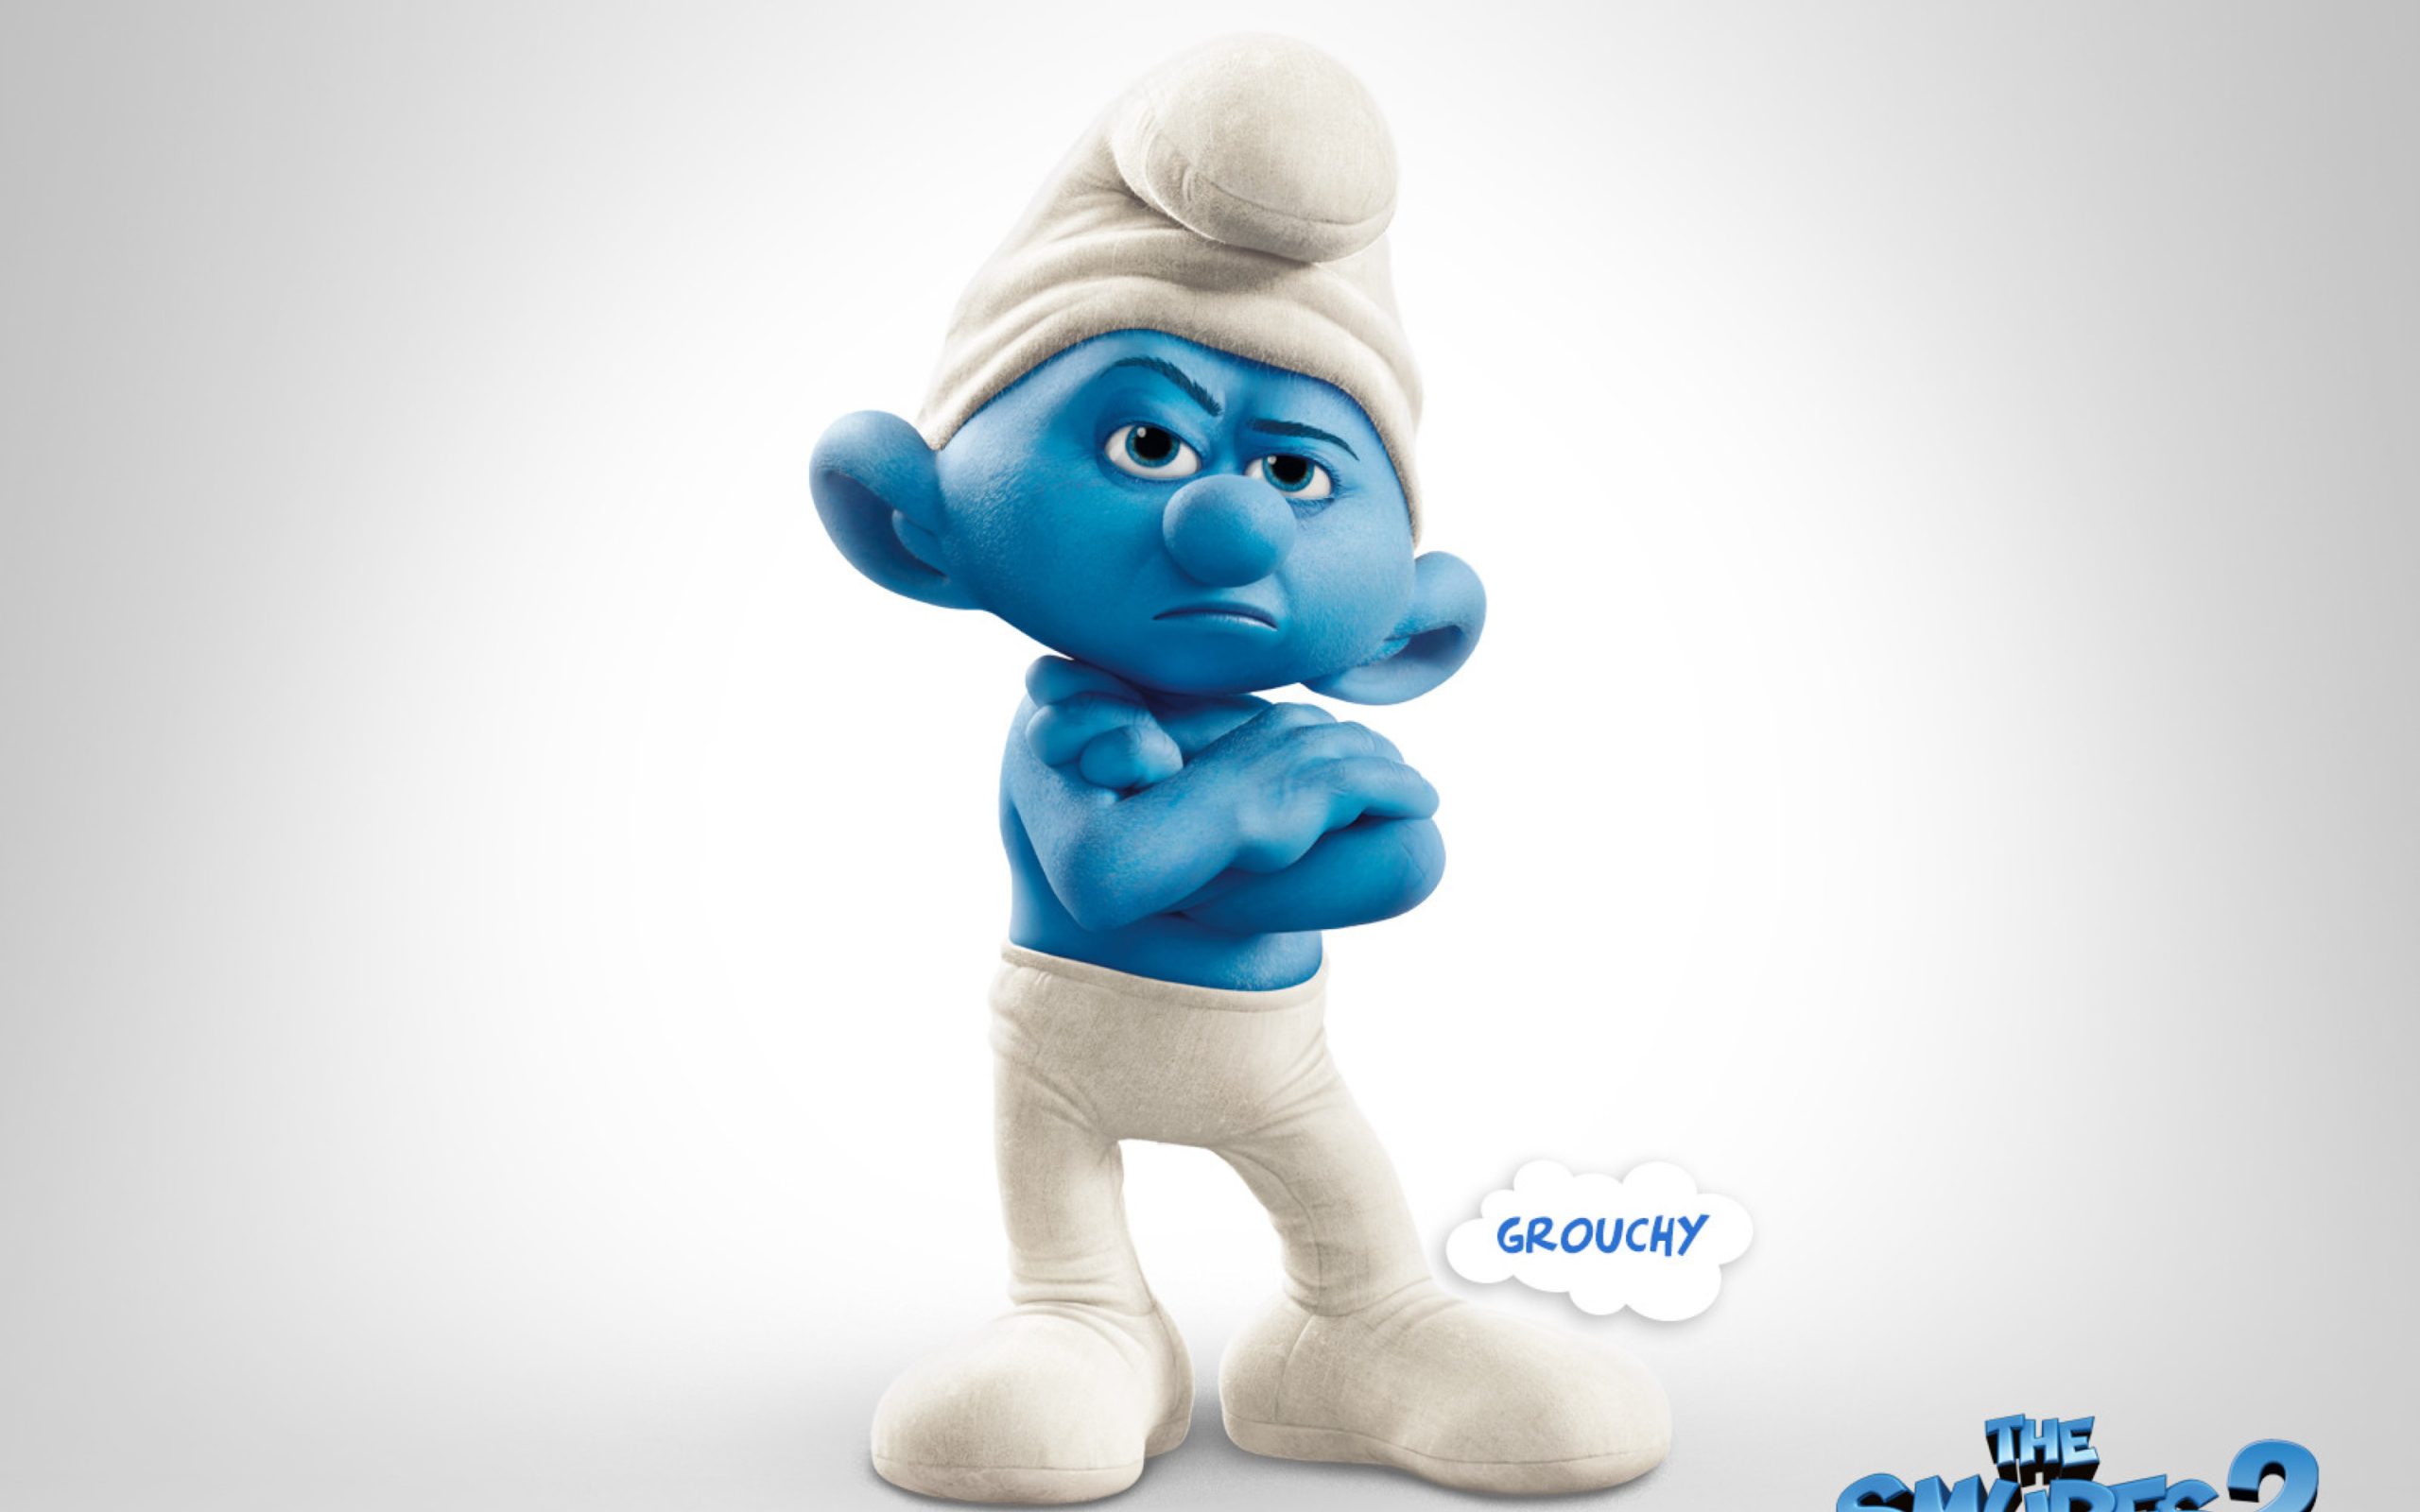 Grouchy The Smurfs 2 wallpaper 2560x1600